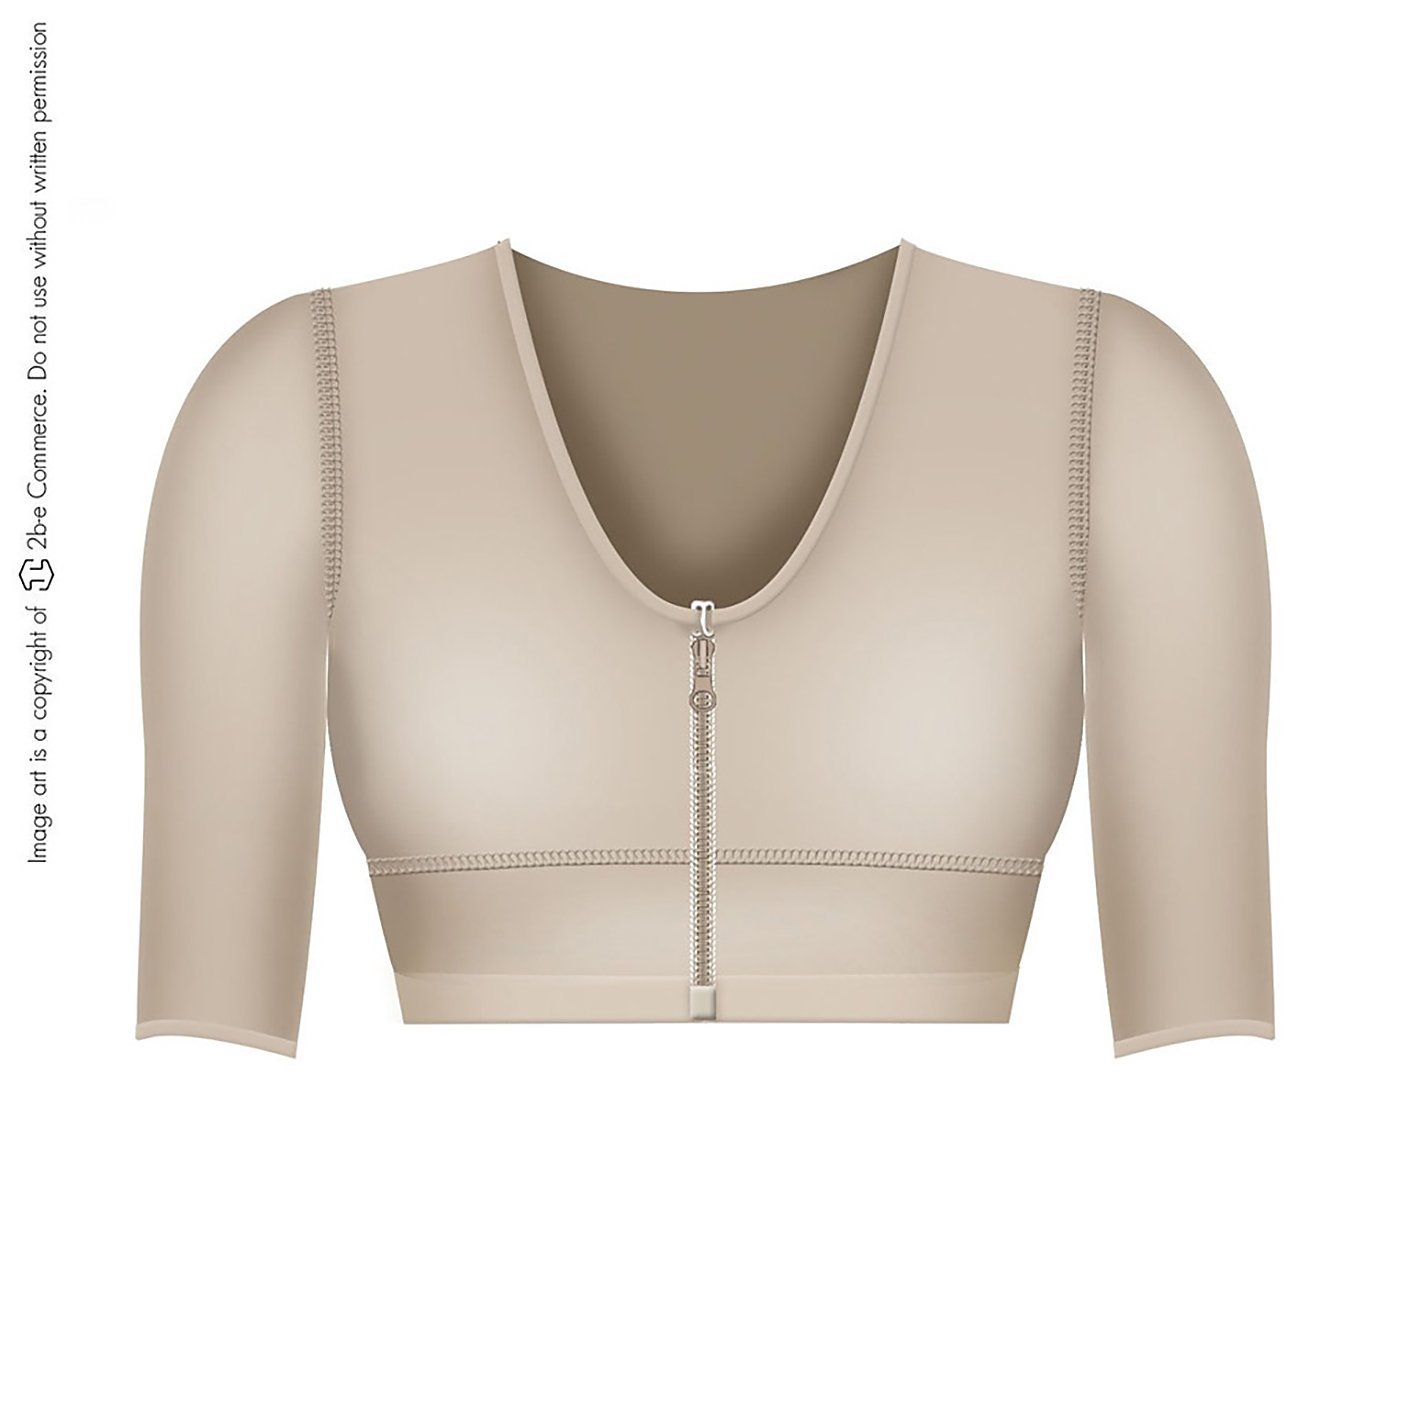 FAJAS SALOME 328 Surgical Breast Augmentation Bra with Sleeves - New England Supplier